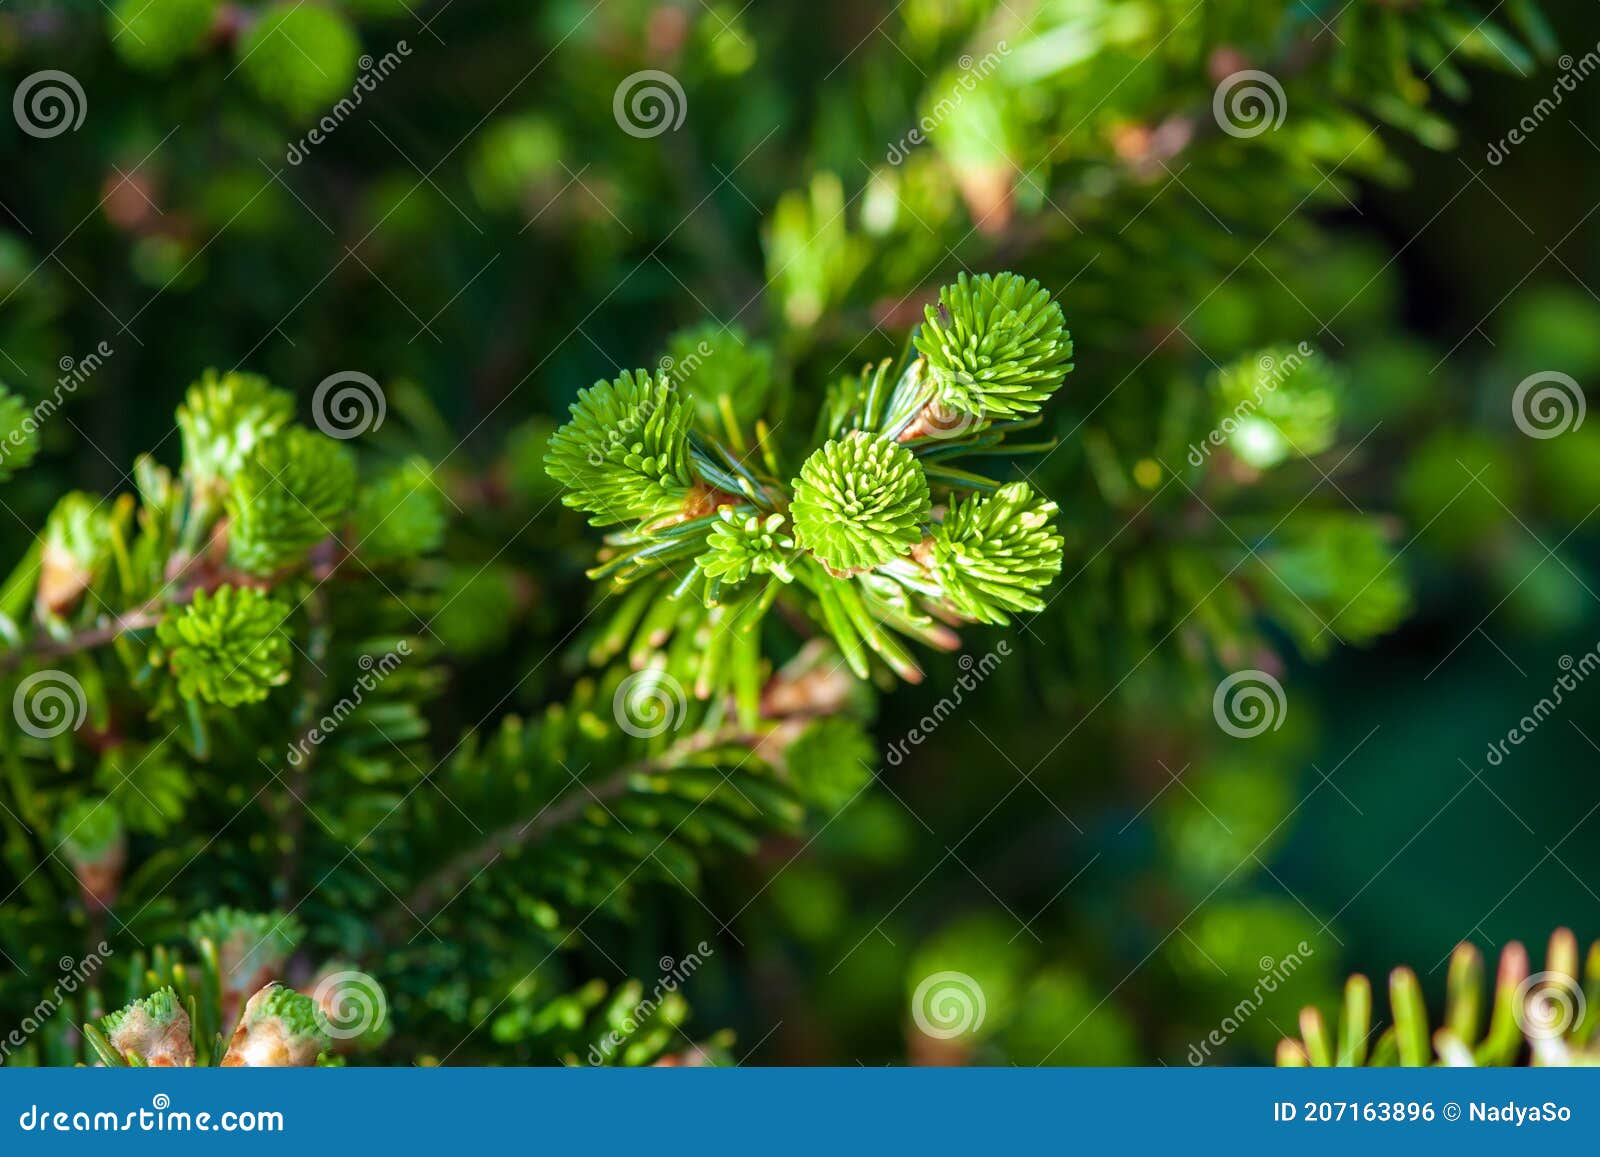 christmas tree abies alba twigs with young shoots in spring